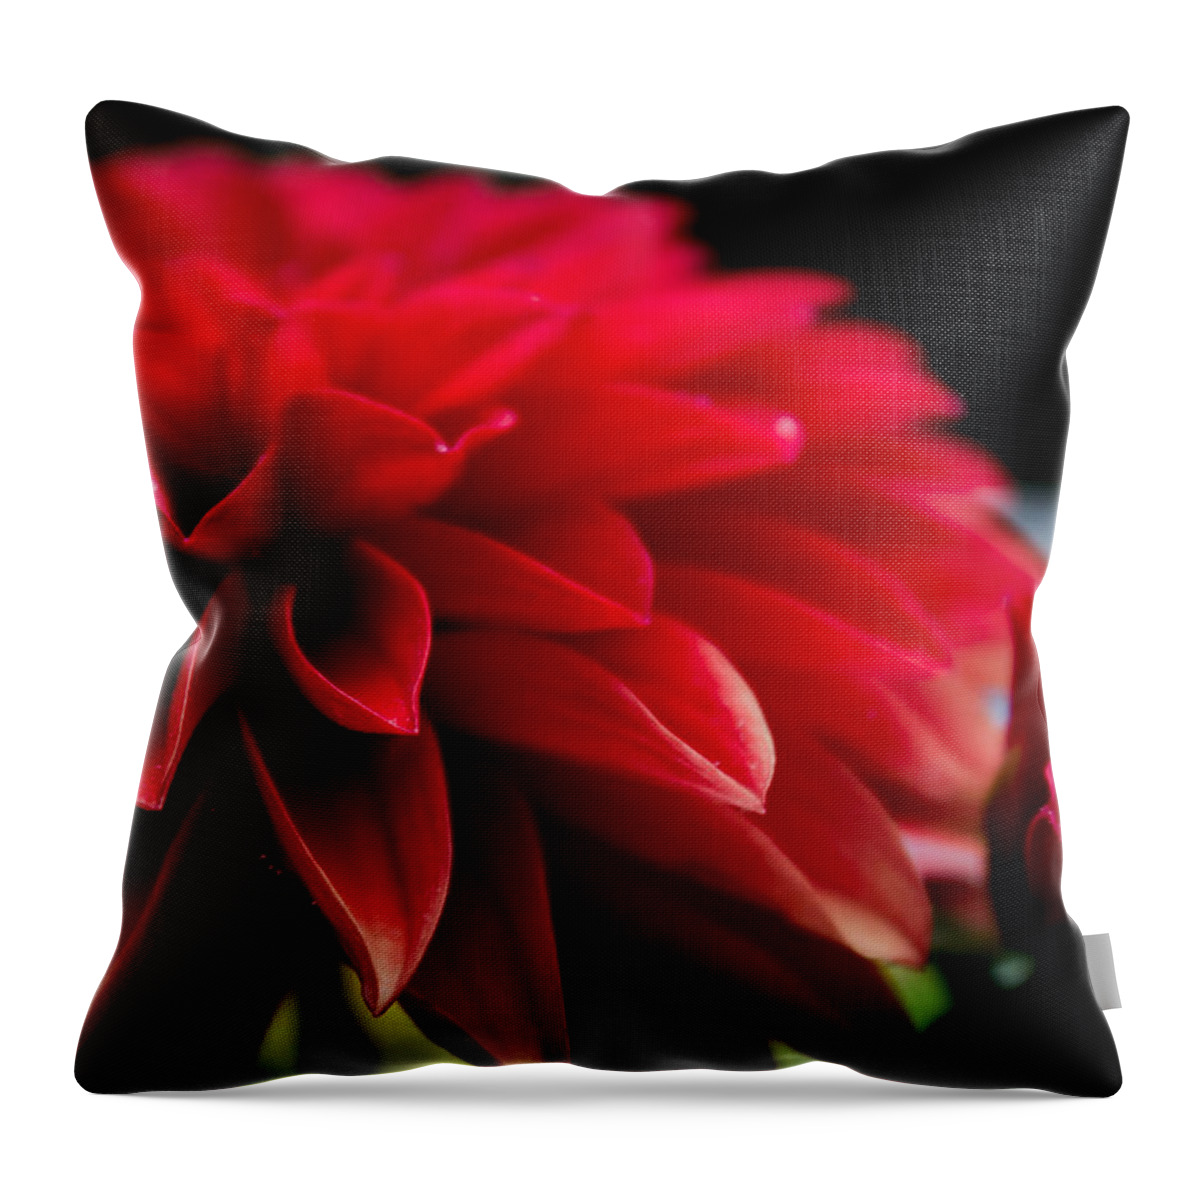 Flowers Throw Pillow featuring the photograph Red Flowers by Glenn DiPaola